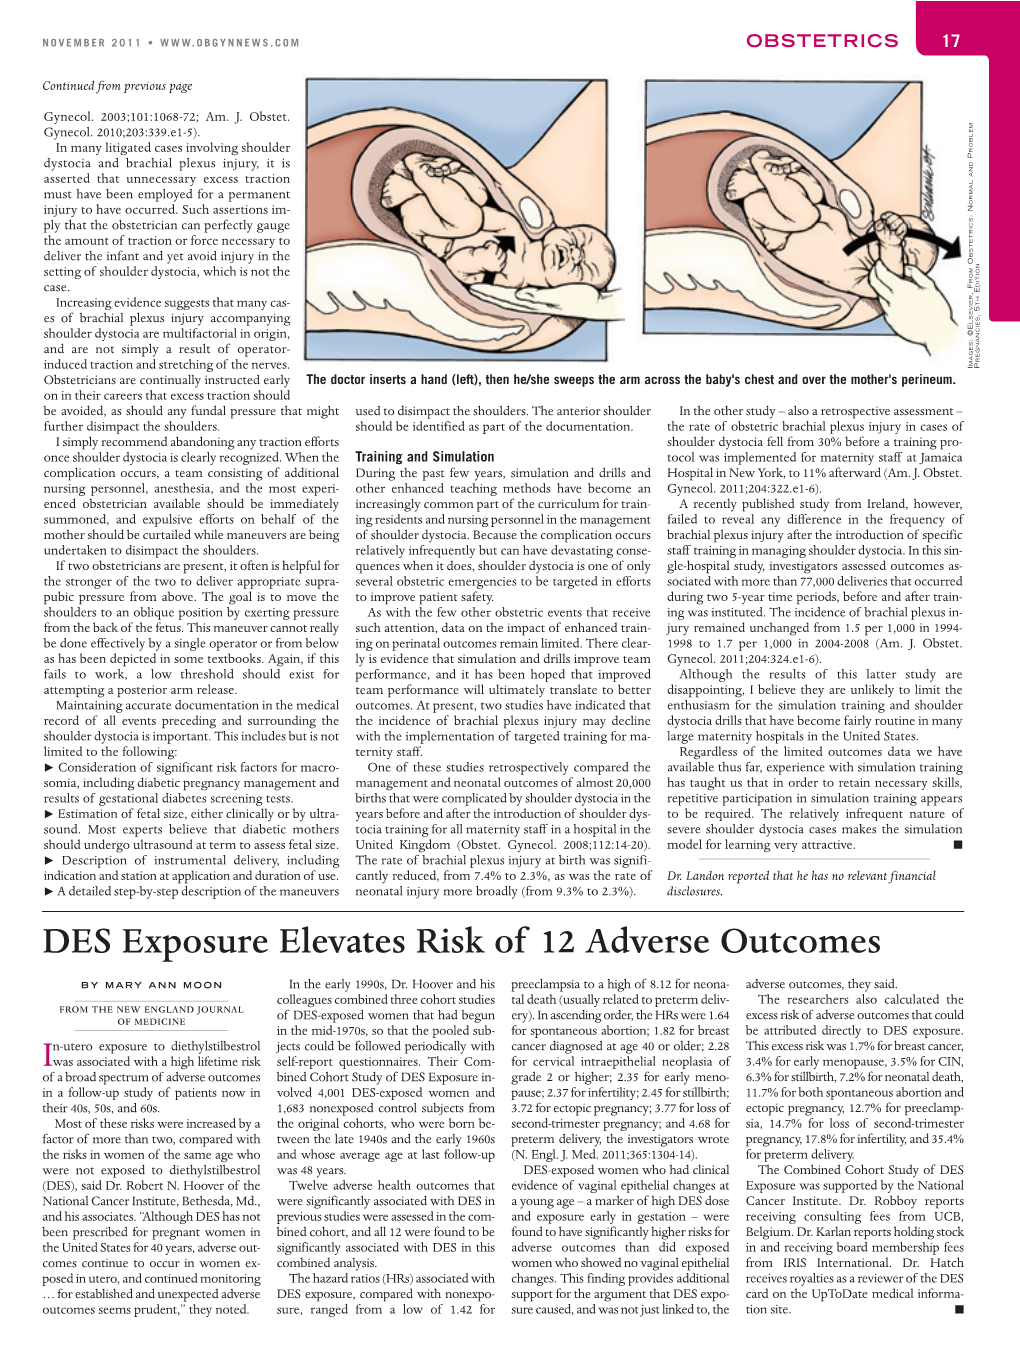 DES Exposure Elevates Risk of 12 Adverse Outcomes